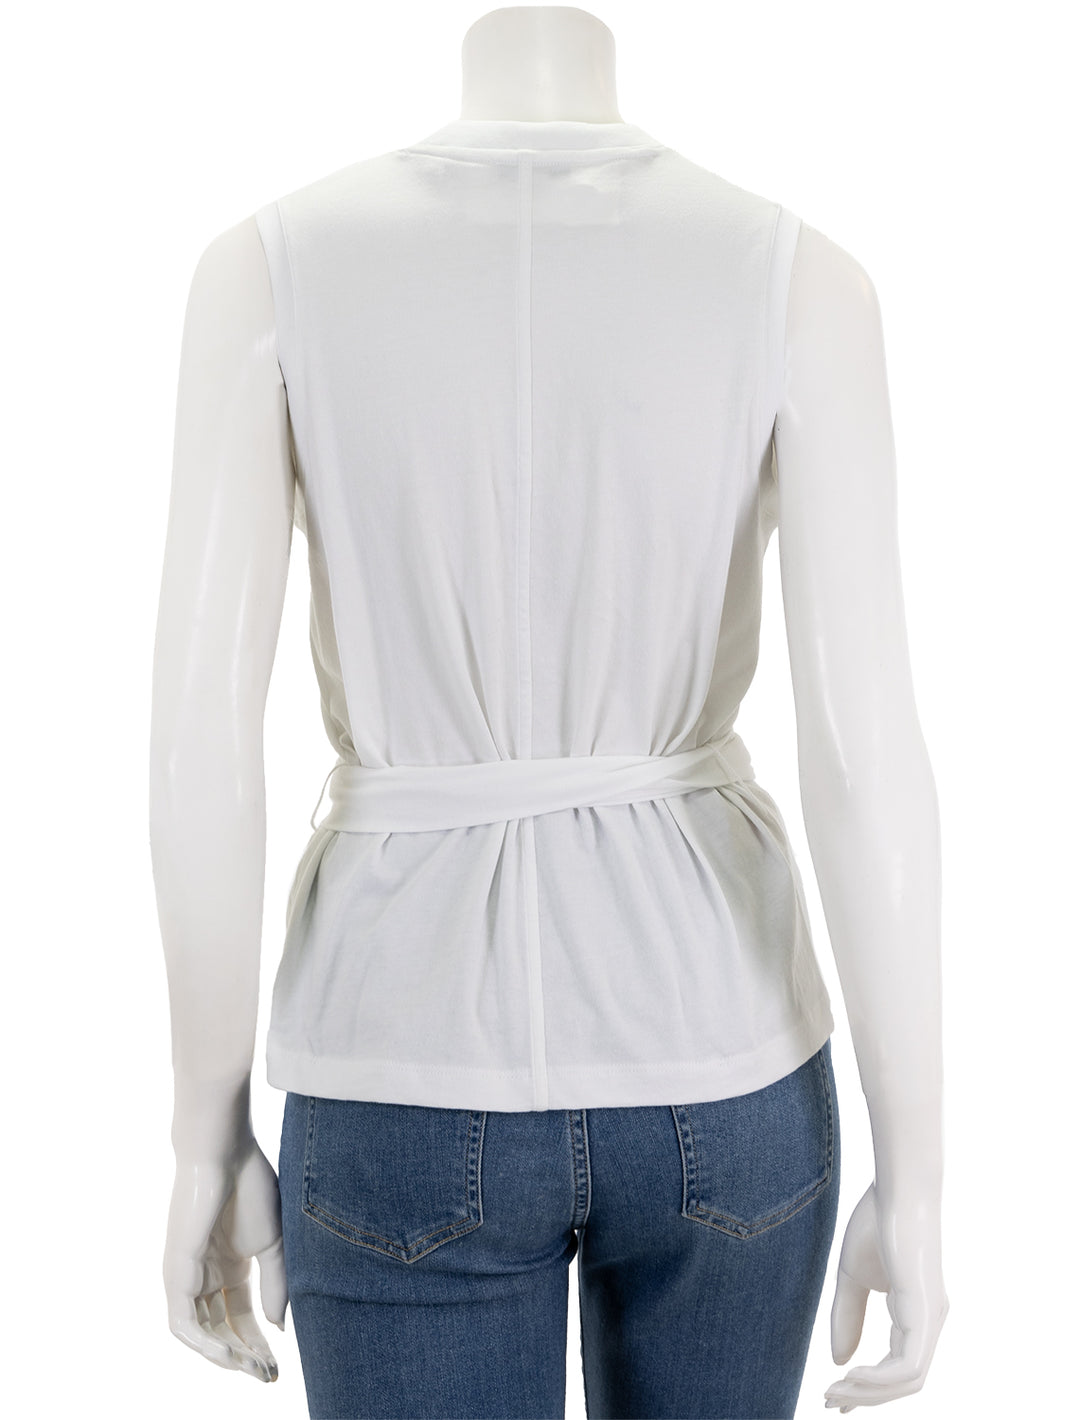 Back view of Vince's sleeveless wrap top in optic white.